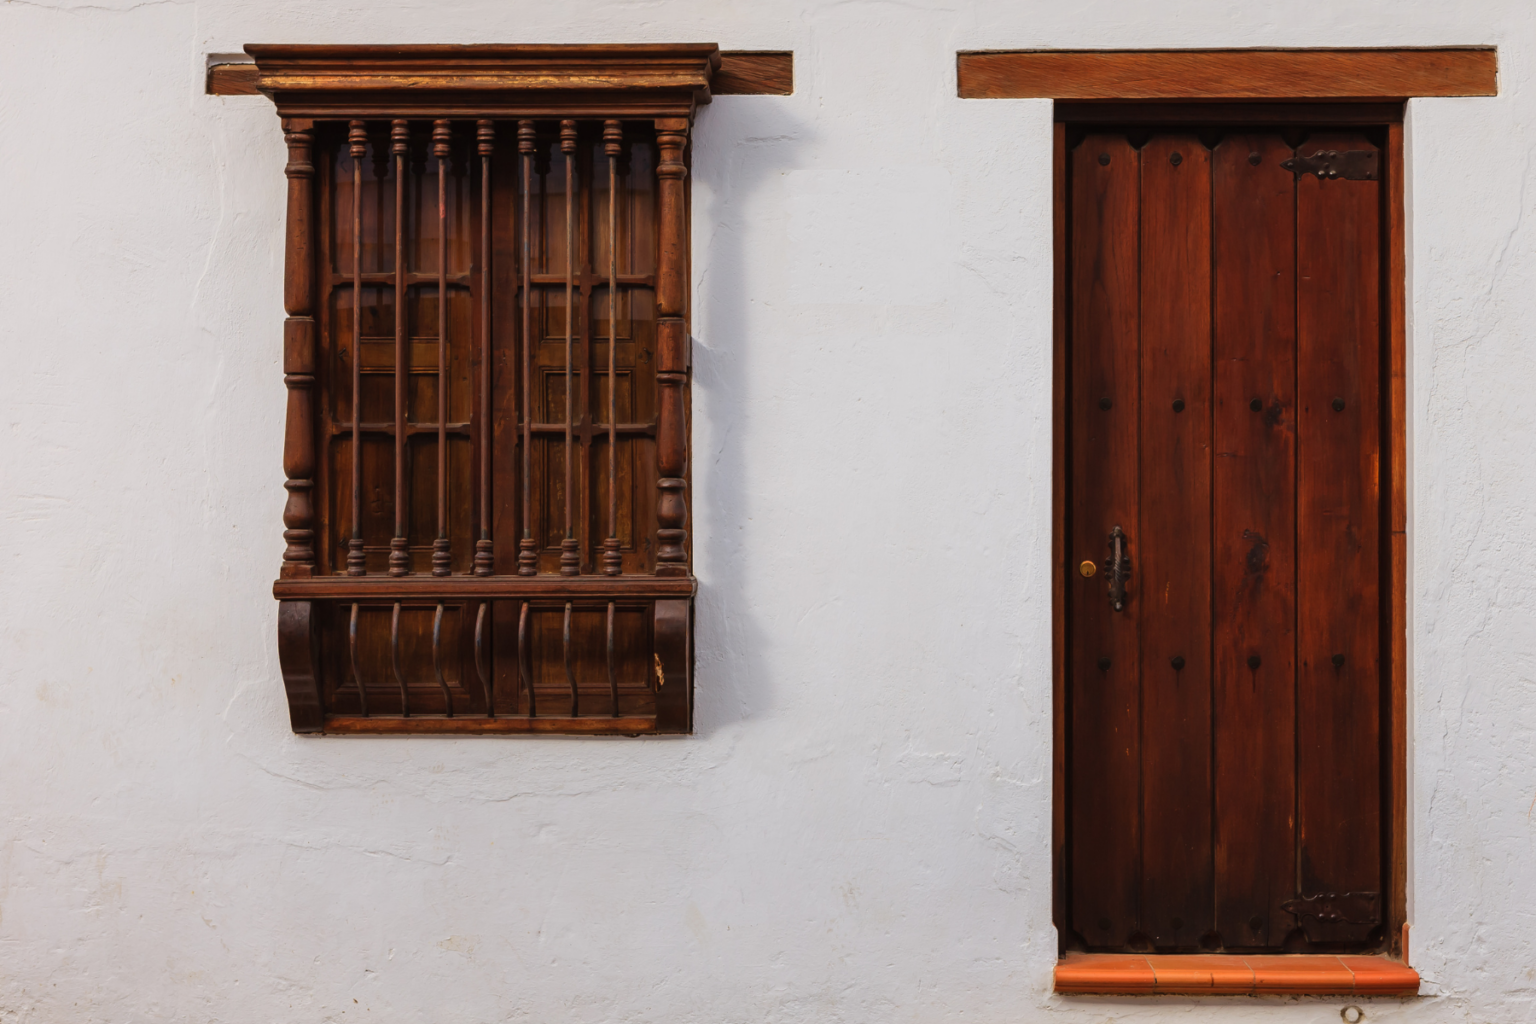 Wooden window and door on white wall